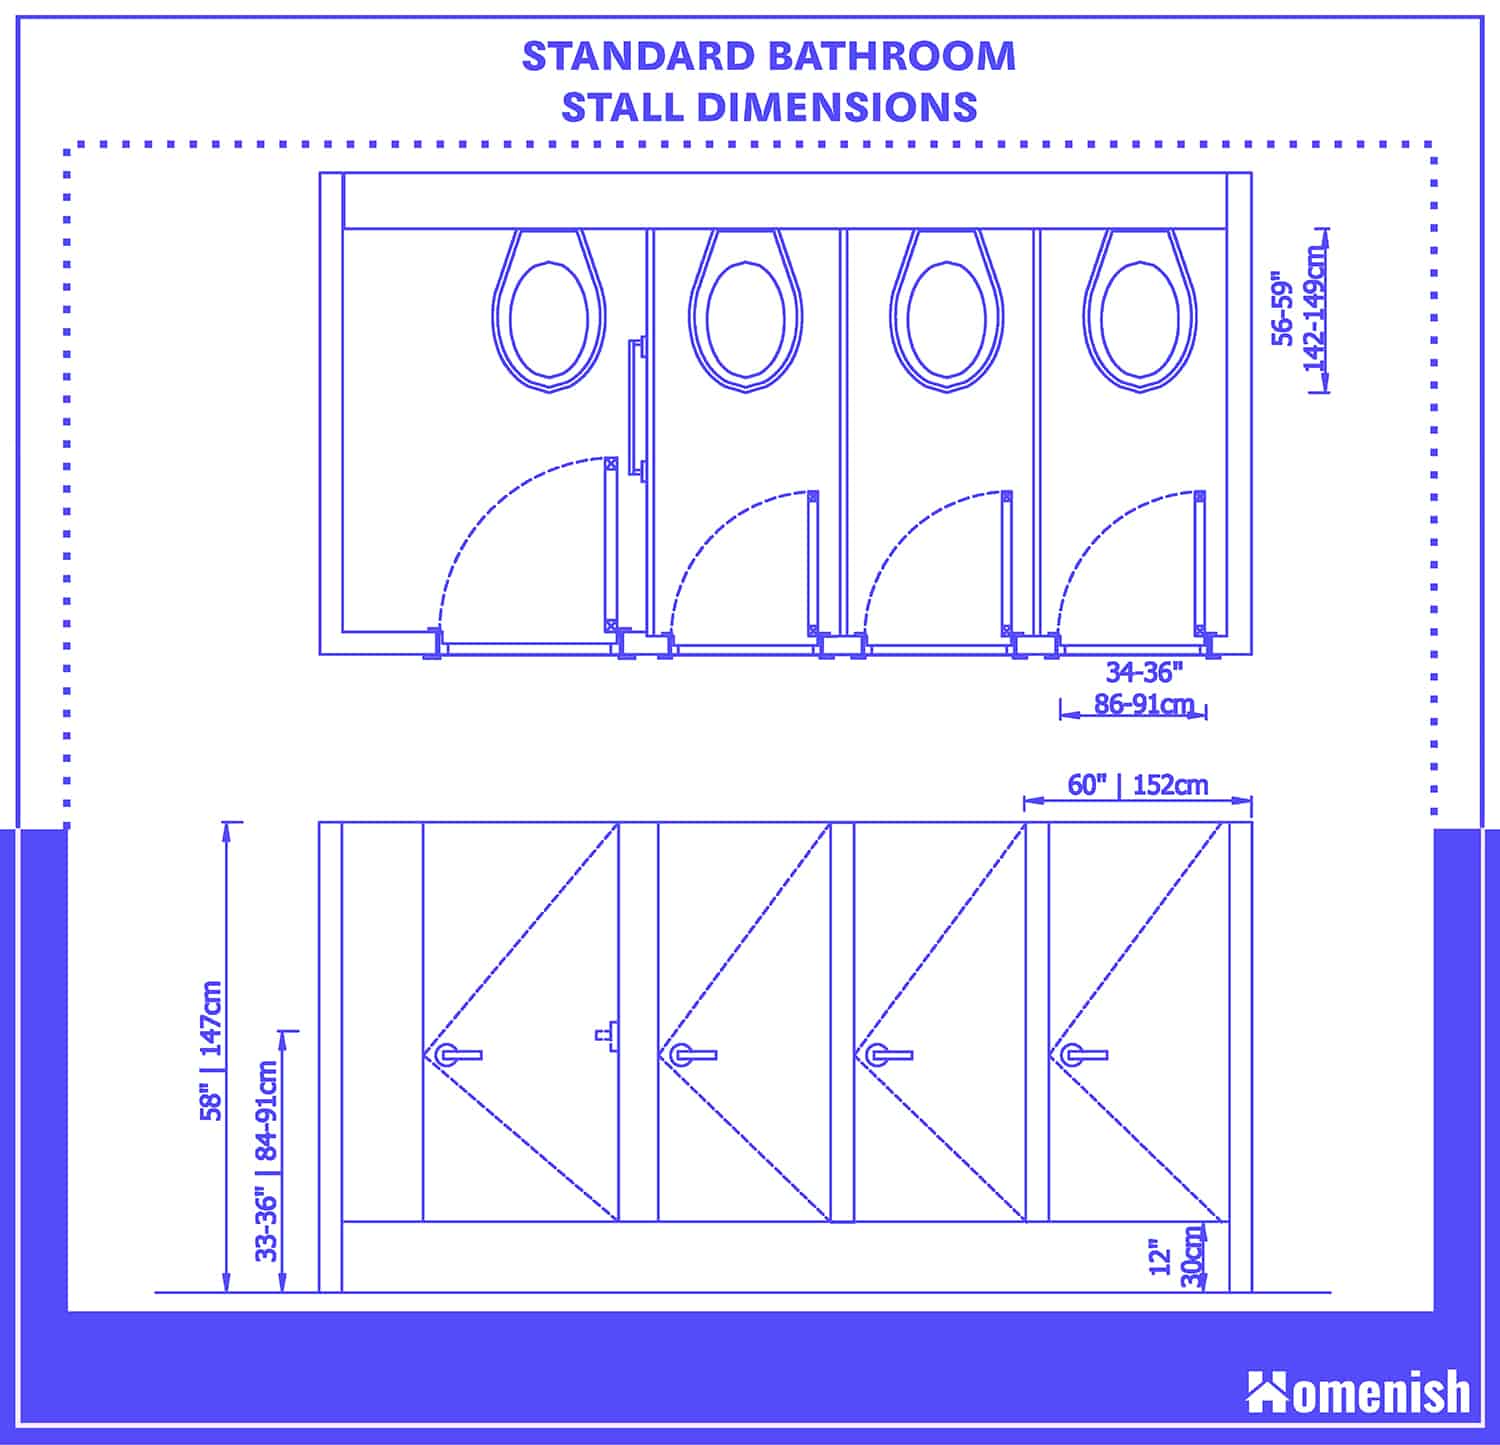 Guides To Bathroom Stall Dimensions, Bathroom Stall Dimensions